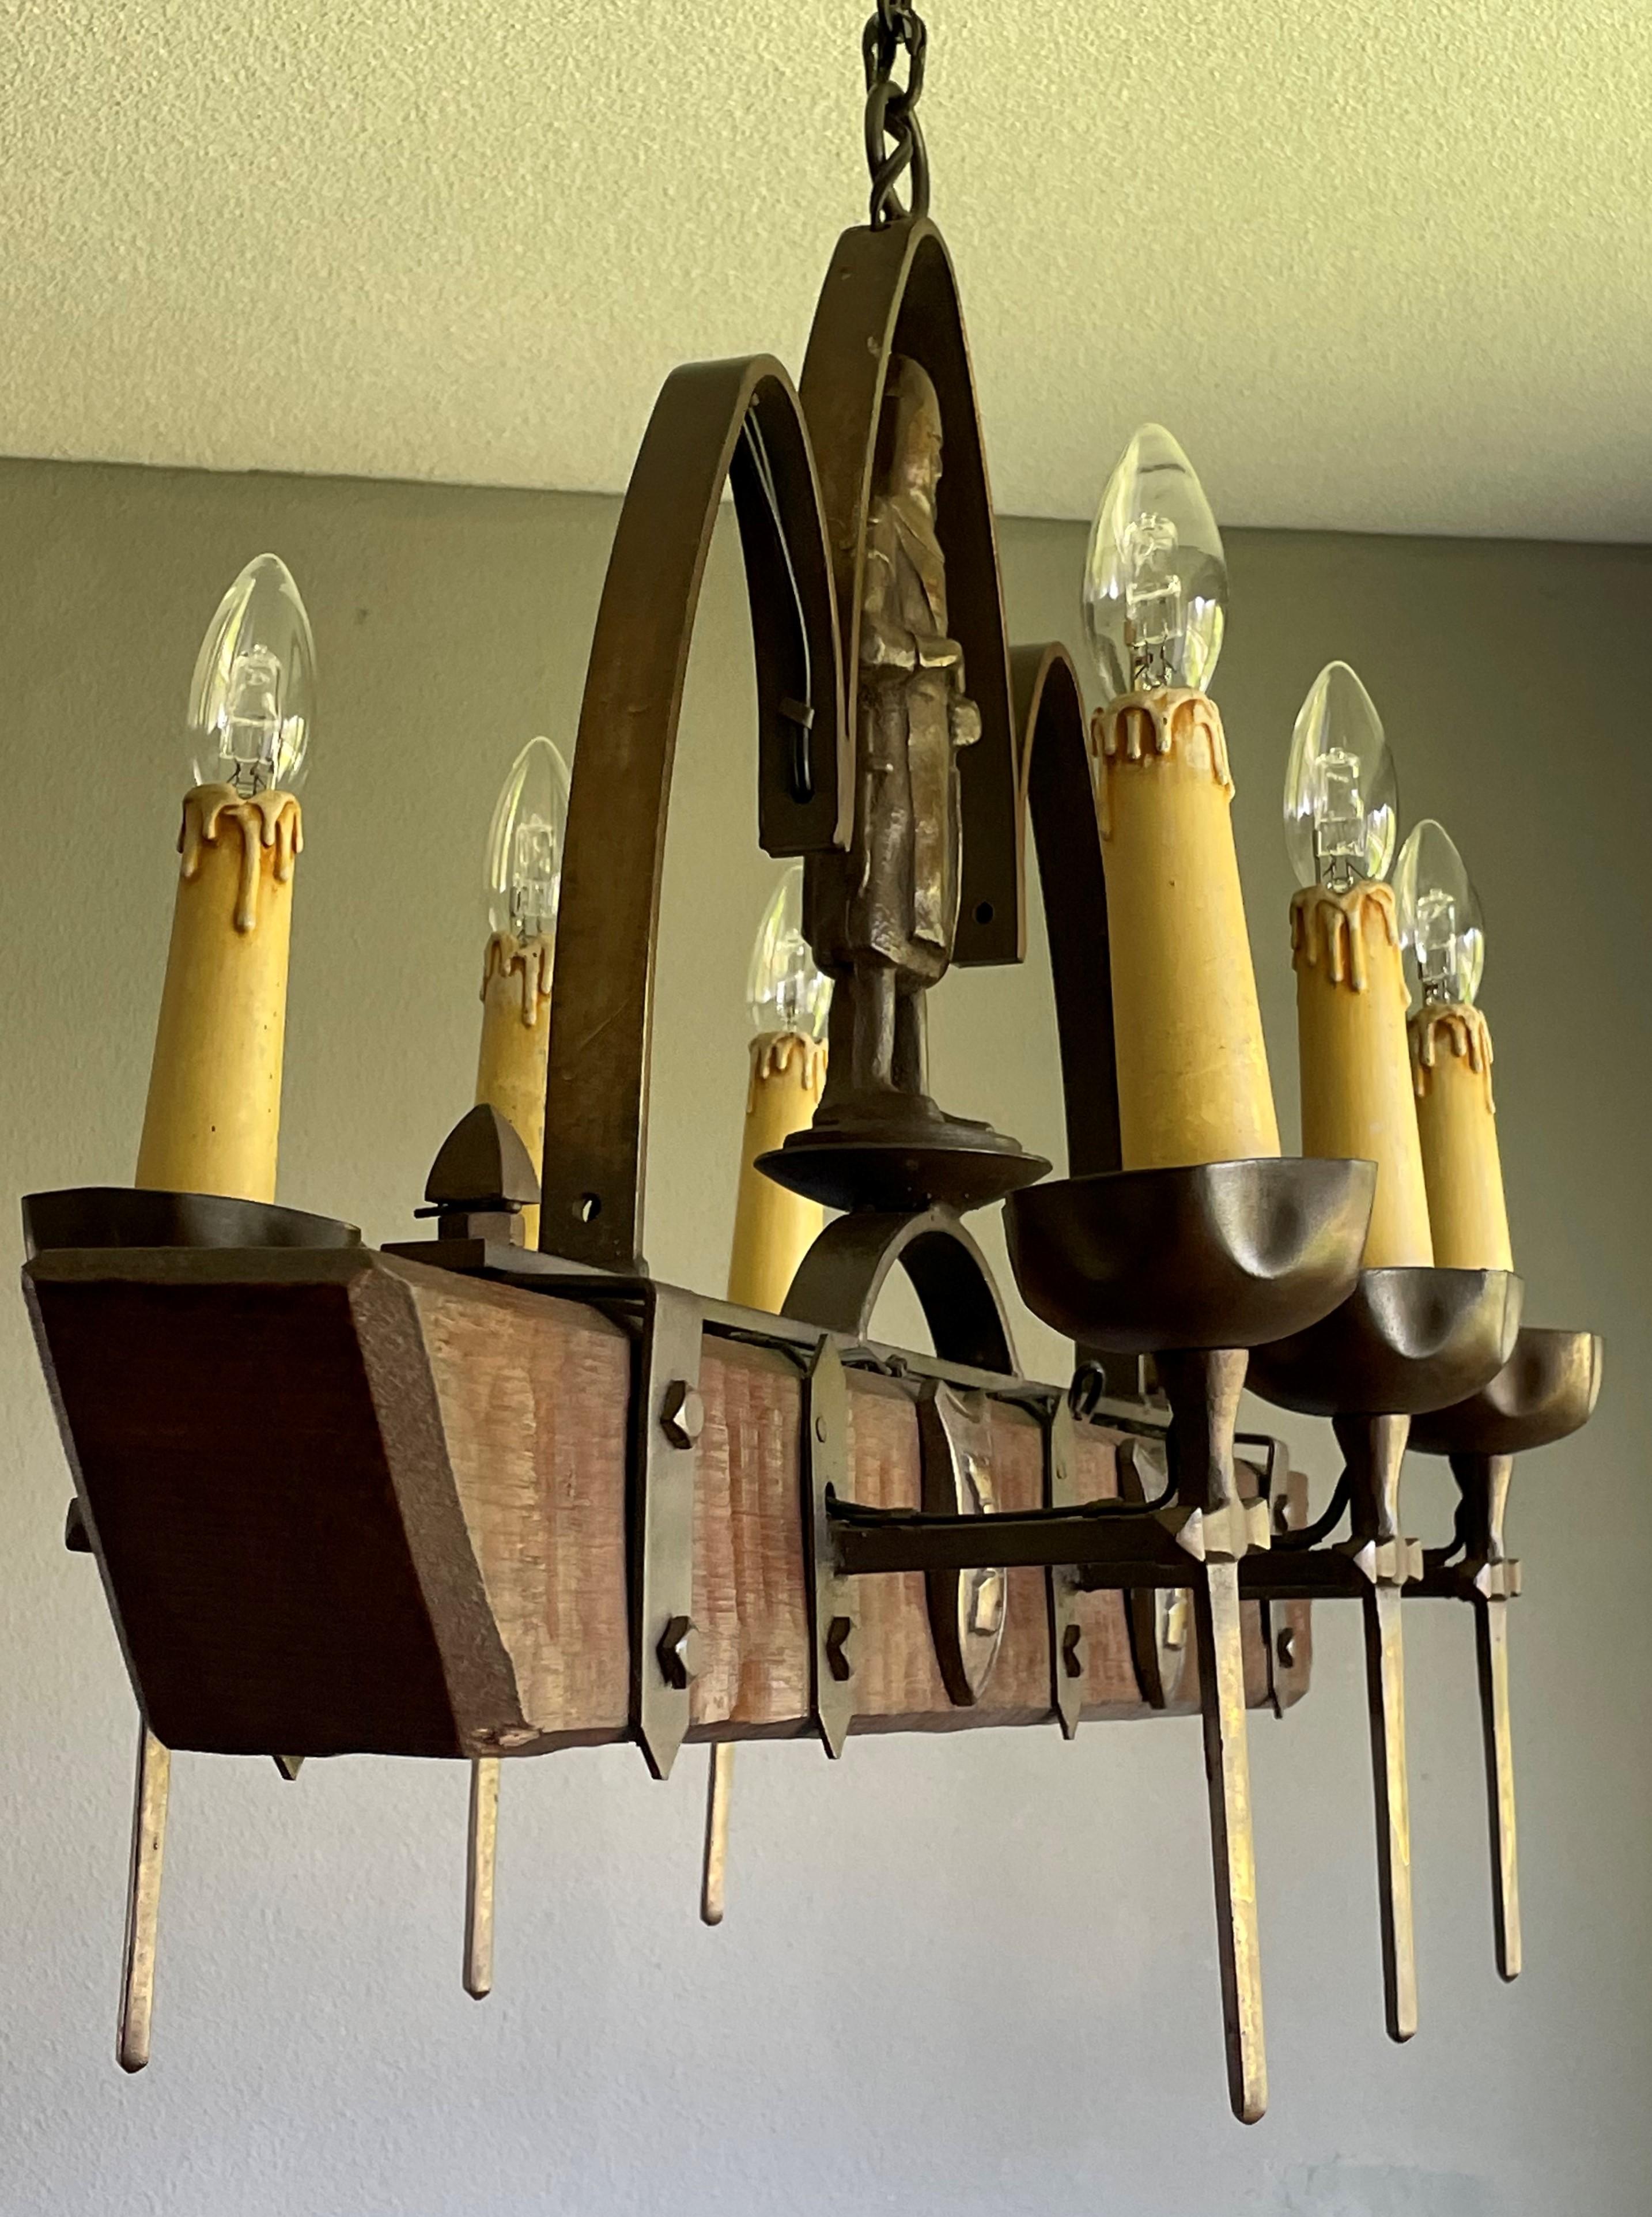 Rare Six-Light Gothic Revival Chandelier with Bronzed Knight & Swords & Crests For Sale 12